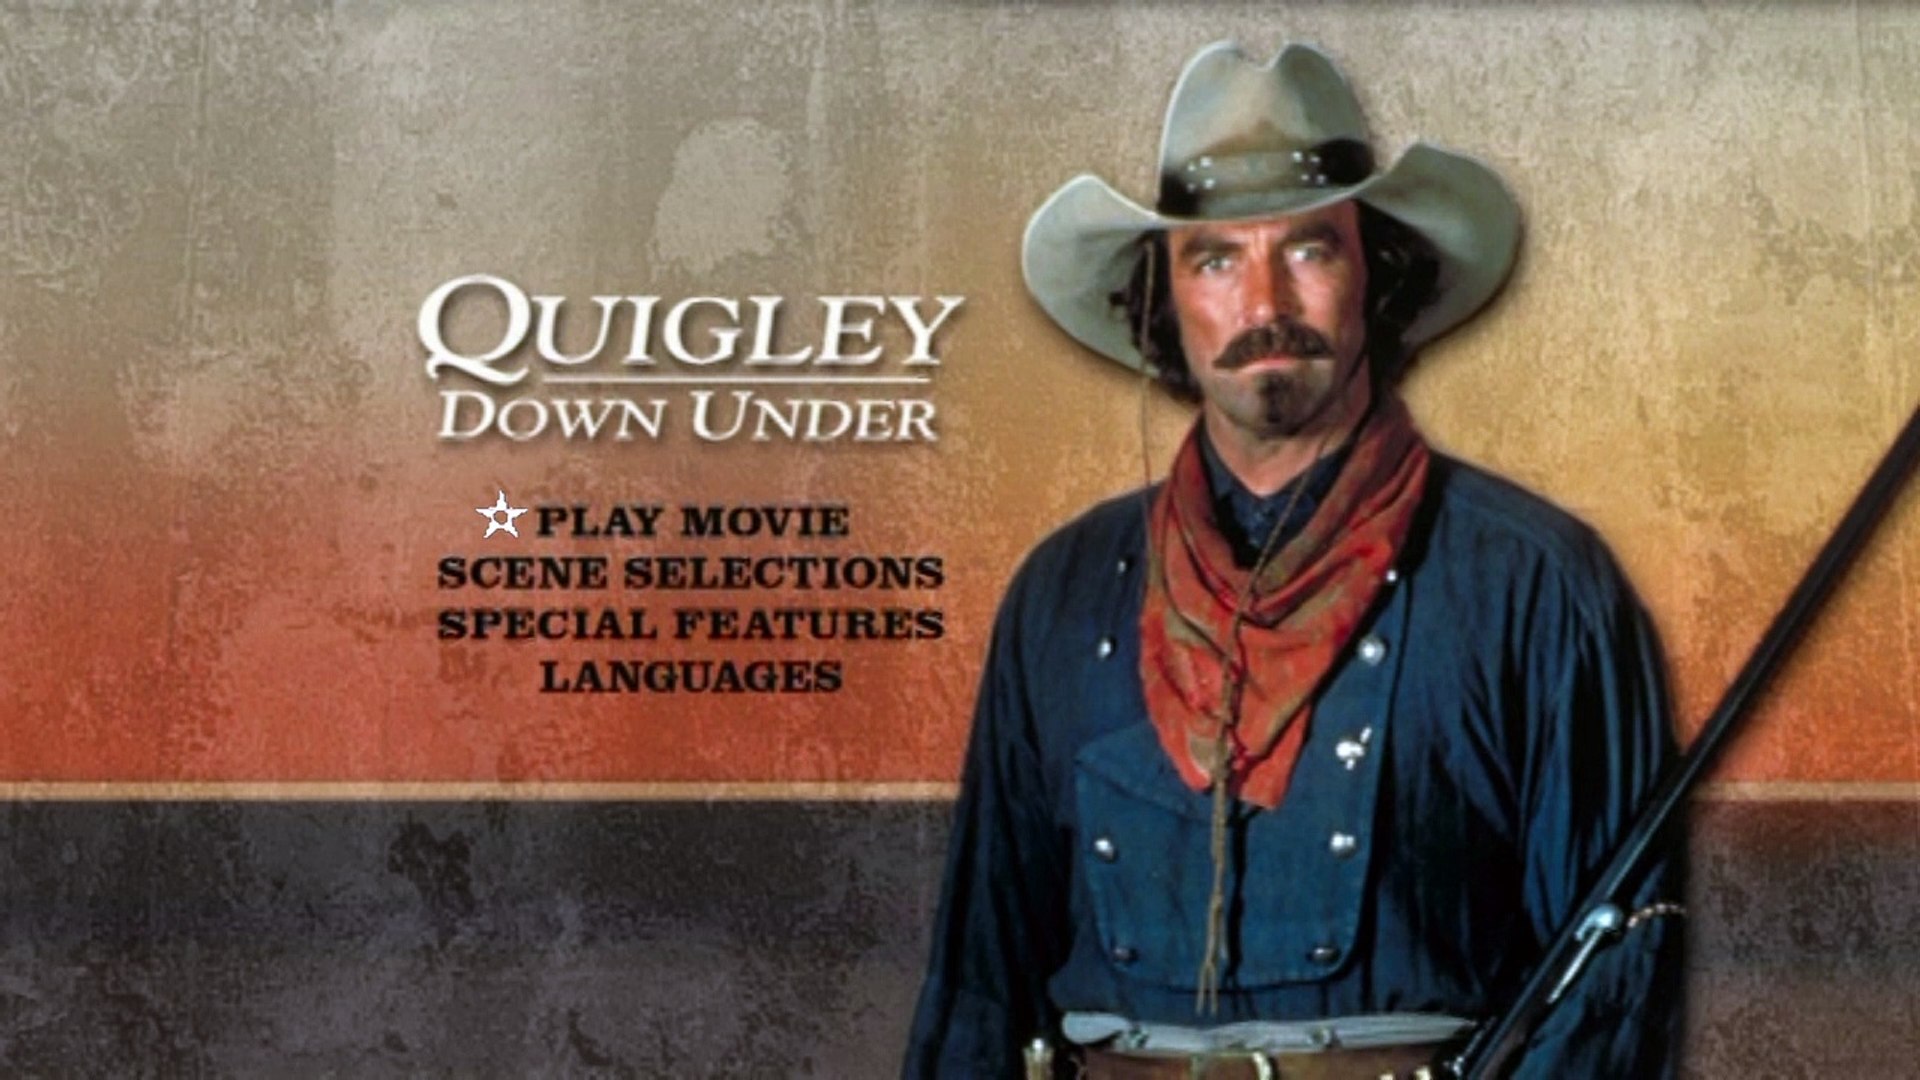 Opening/Closing to Quigley Down Under 2001 DVD (HD) - video Dailymotion